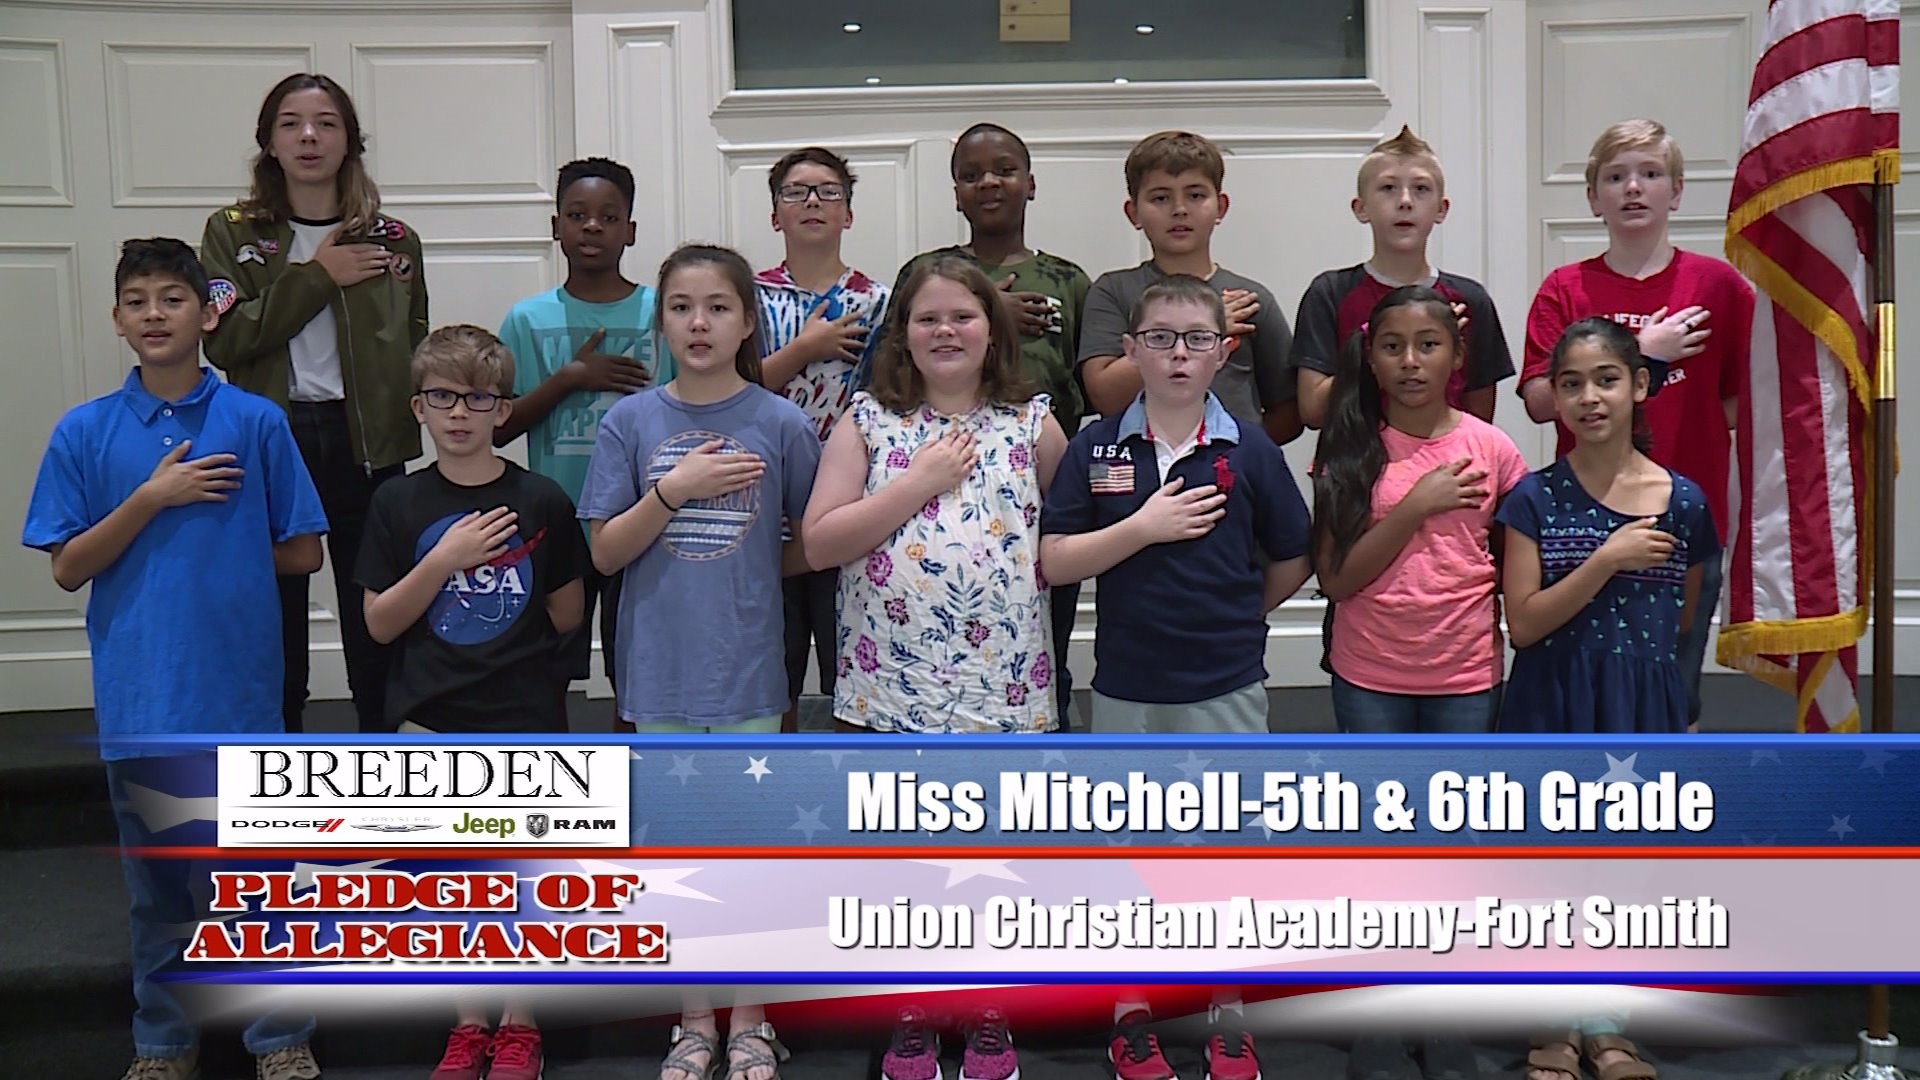 Miss. Mitchell  5th & 6th Grade Union Christian Academy, Fort Smith